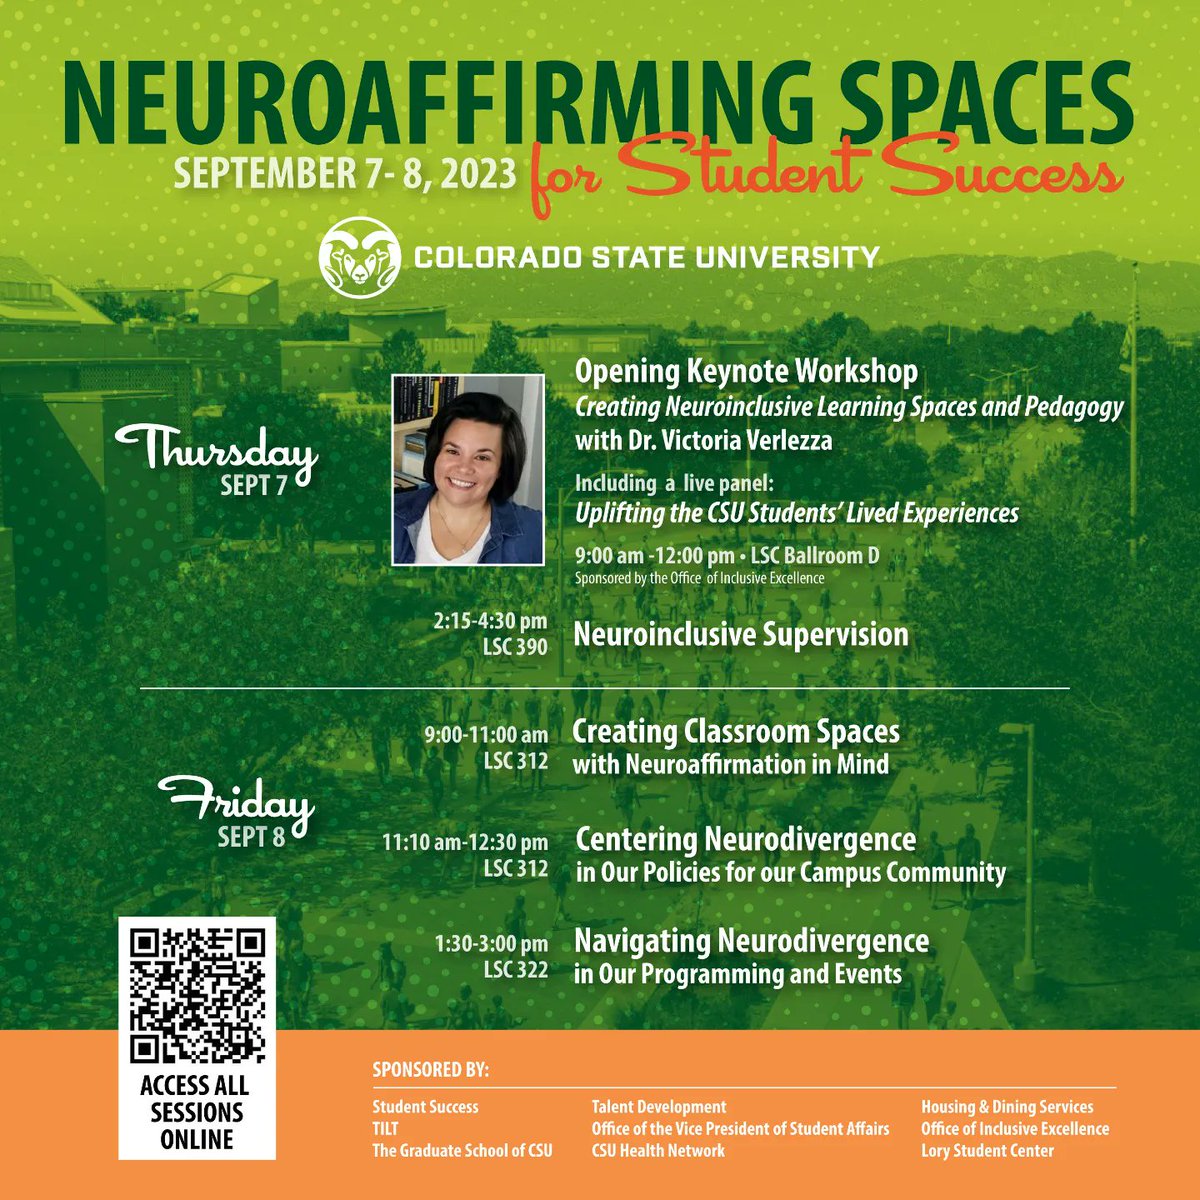 In just 2 weeks there is a workshop for creating Neuroaffirming spaces! This is a 2 day long event on September 7th and 8th. These sessions are held in person or virtual!
#imagedescription 
Light green and dark green background with orange bar at the bottom and light dots.